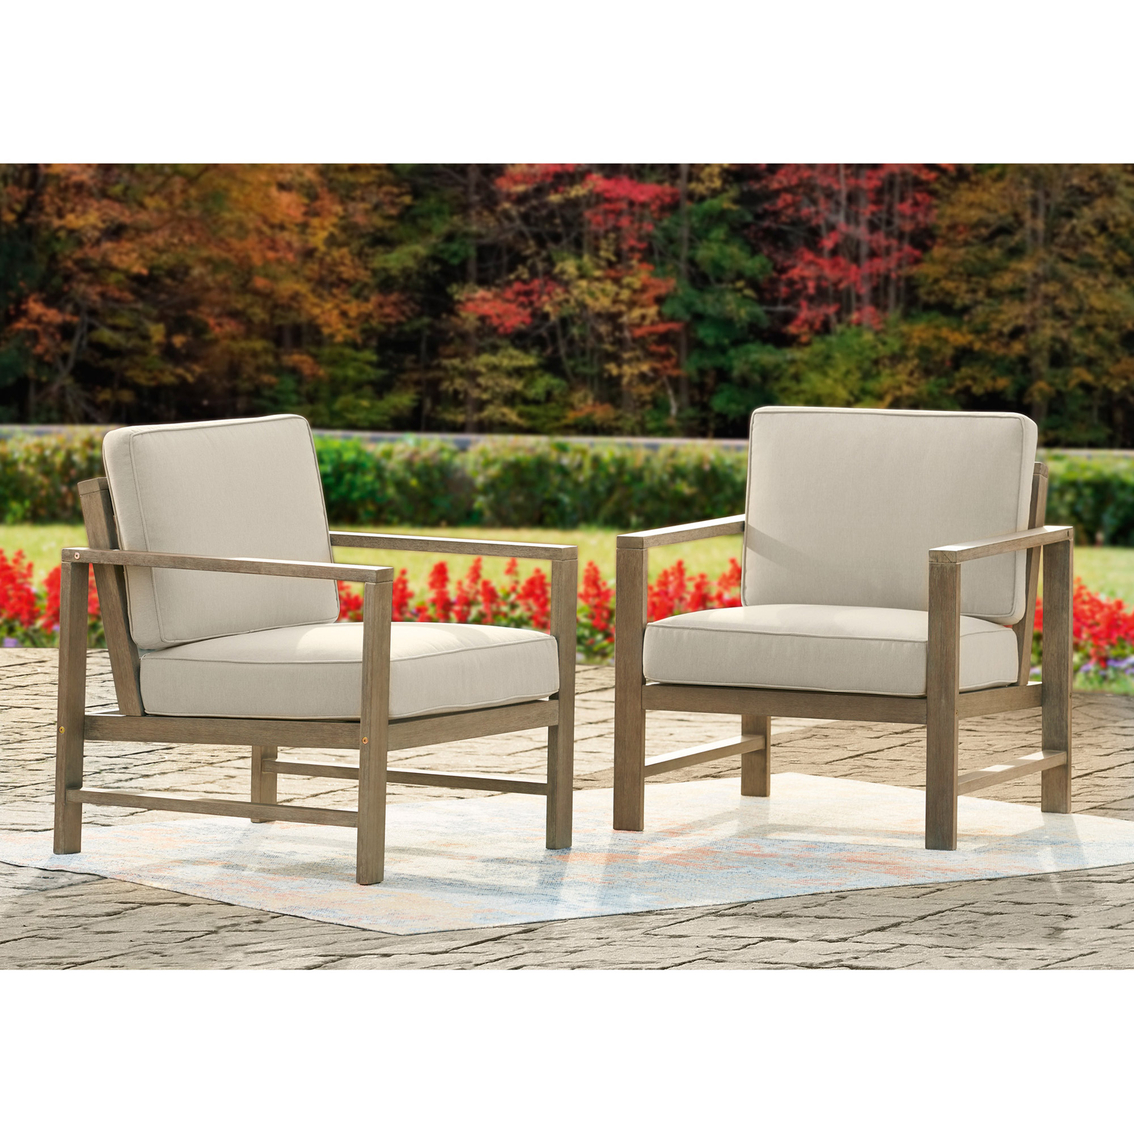 Signature Design by Ashley Fynnegan 4 pc. Outdoor Set - Image 5 of 5